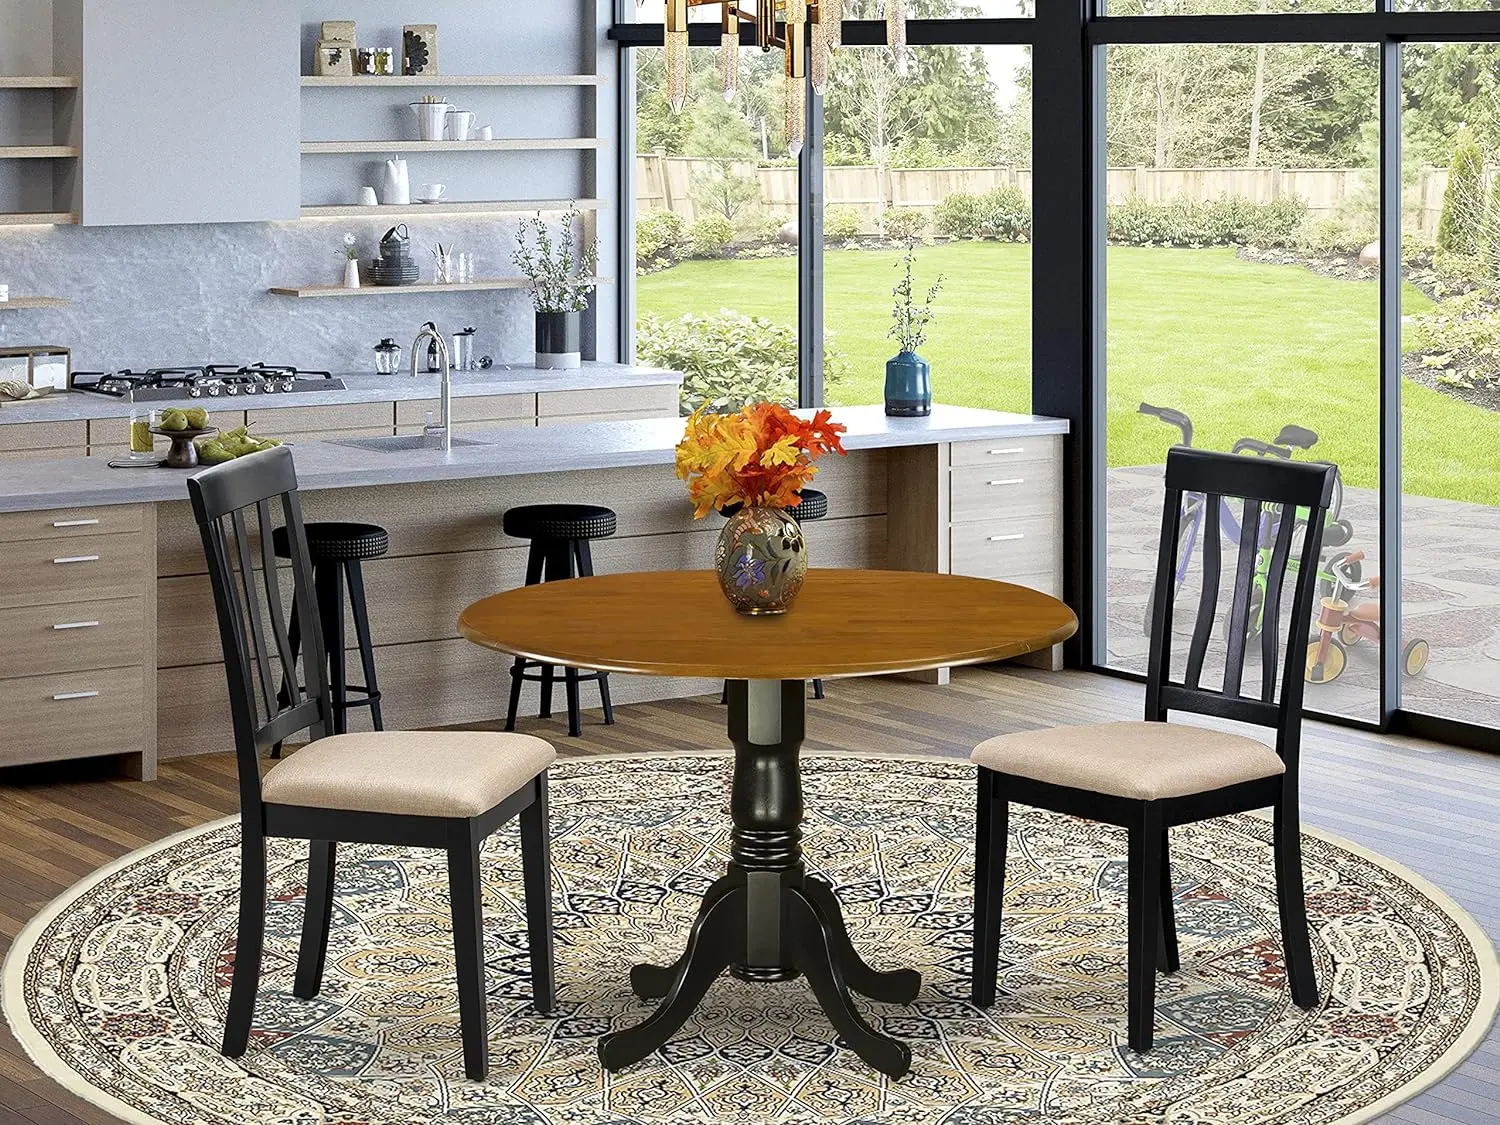 

East West Furniture DLAN3-BCH-C 3 Piece Dining Room Table Set Contains a Round Kitchen Table with Dropleaf